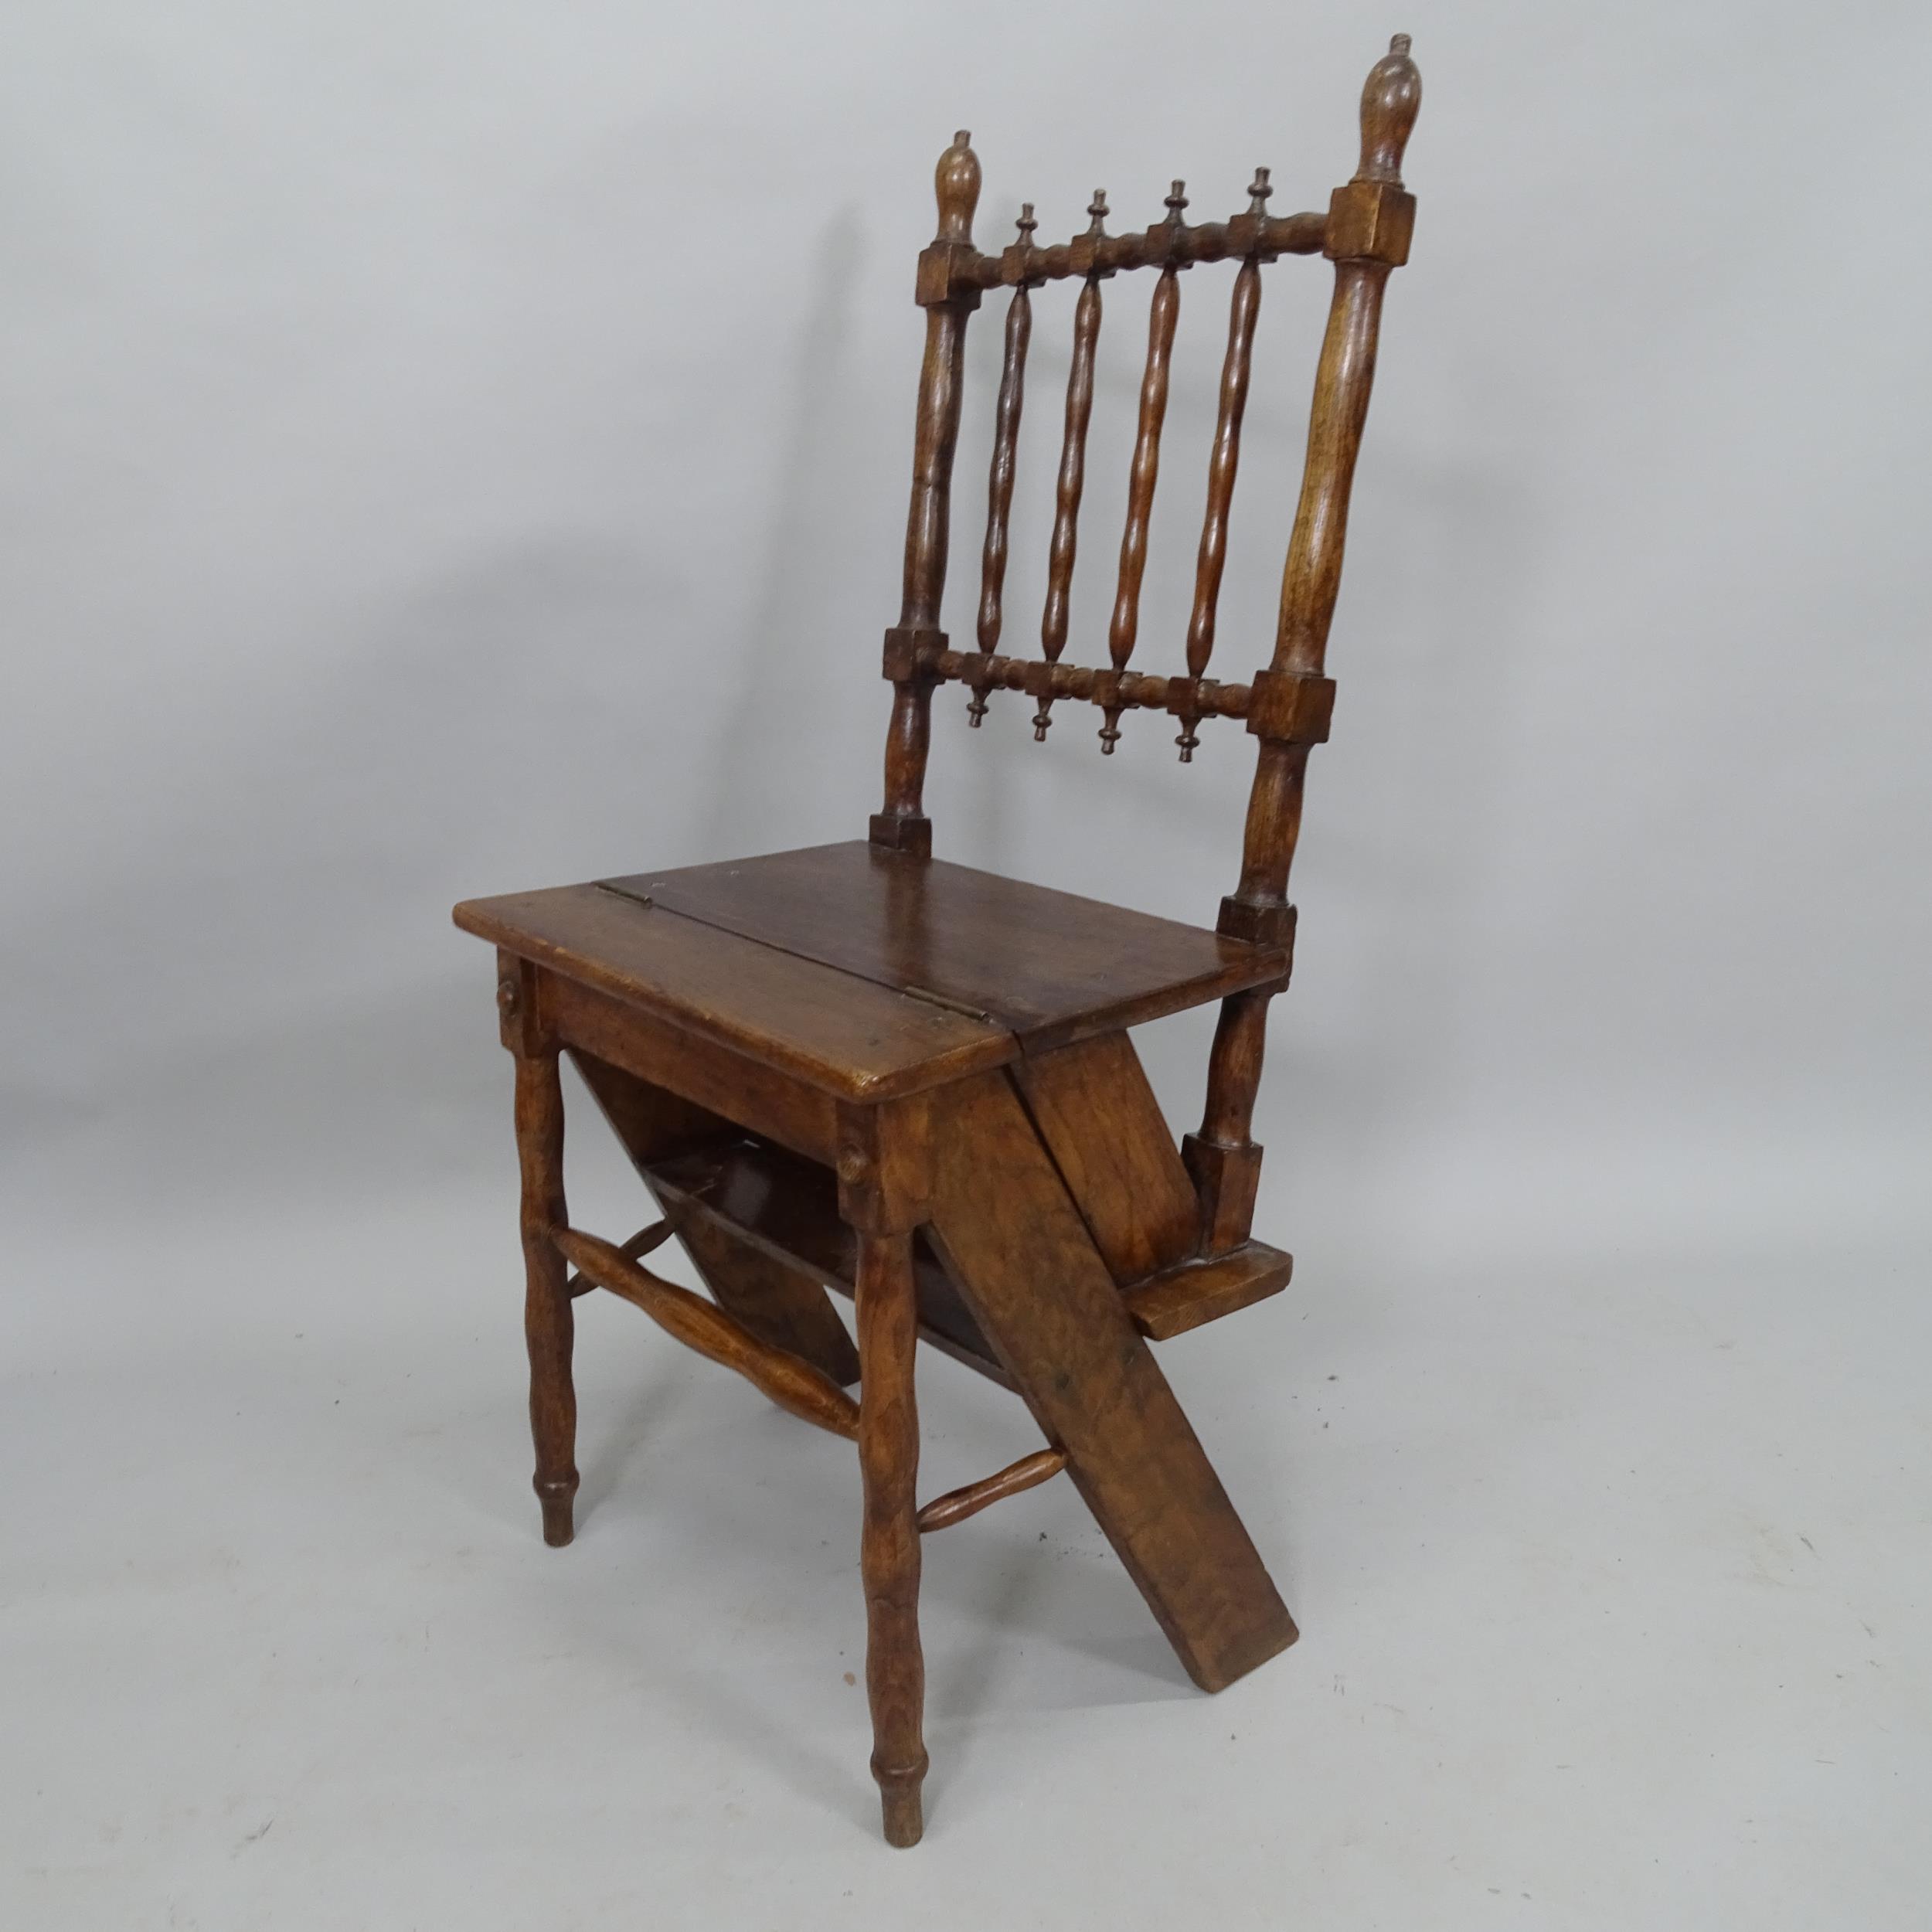 A 19th century oak metamorphic library step chair, with turned spindle back and legs